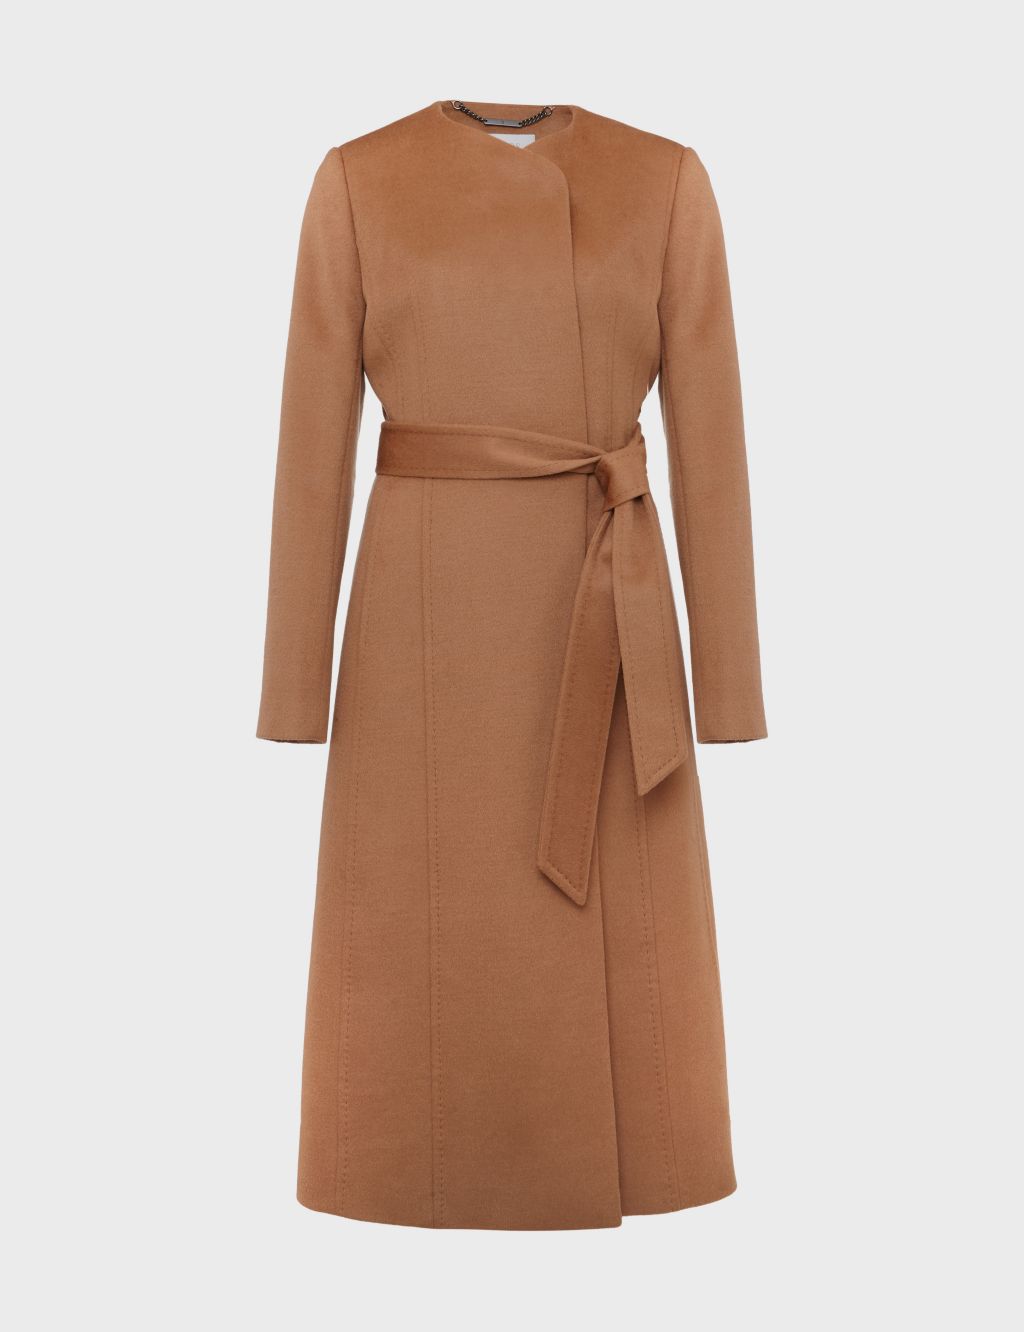 Pure Wool Belted Collarless Tailored Coat image 2